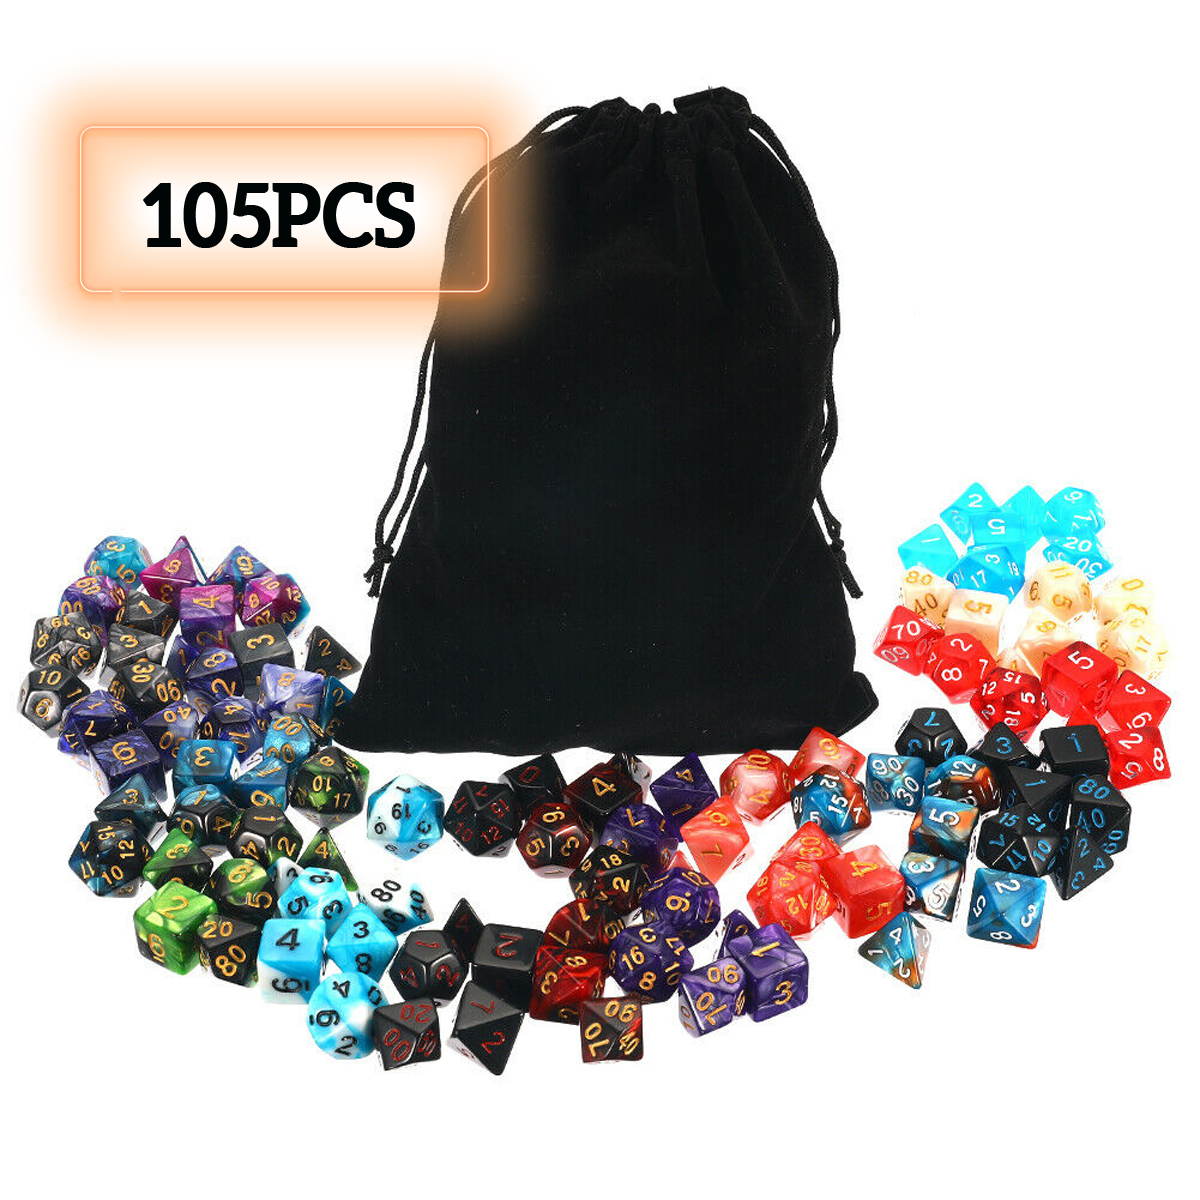 105-Pcs-Dice-Set-Polyhedral-Dices-7-Color-Role-Playing-Table-Game-With-Cloth-Game-Multi-sied-Dice-1574100-4